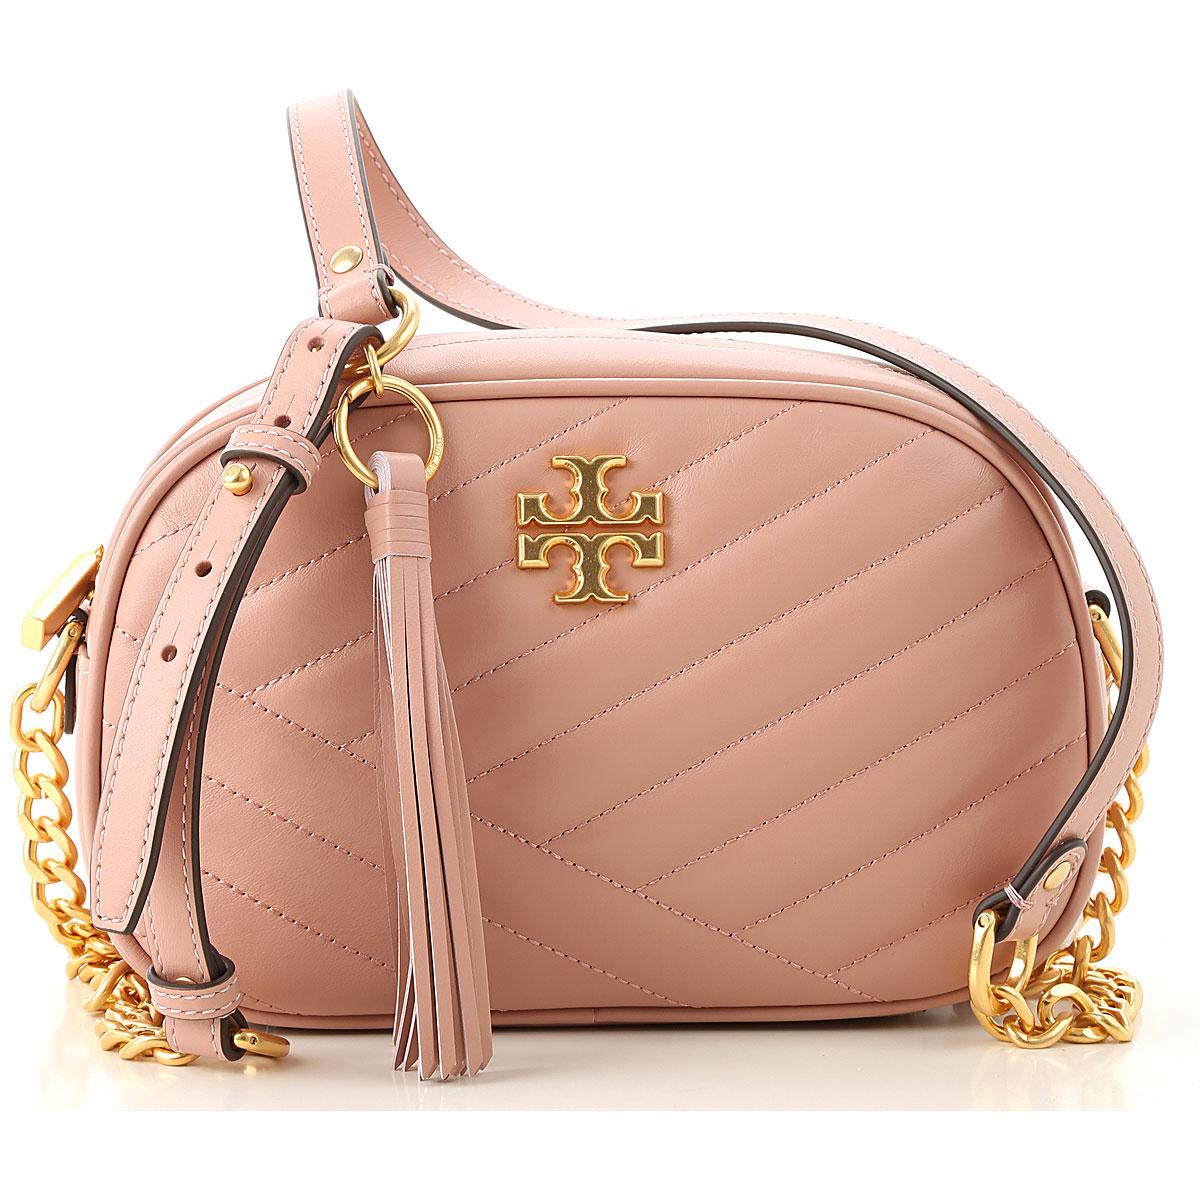 Tory Burch Shoulder Bag For Women On Sale in Pink - Lyst